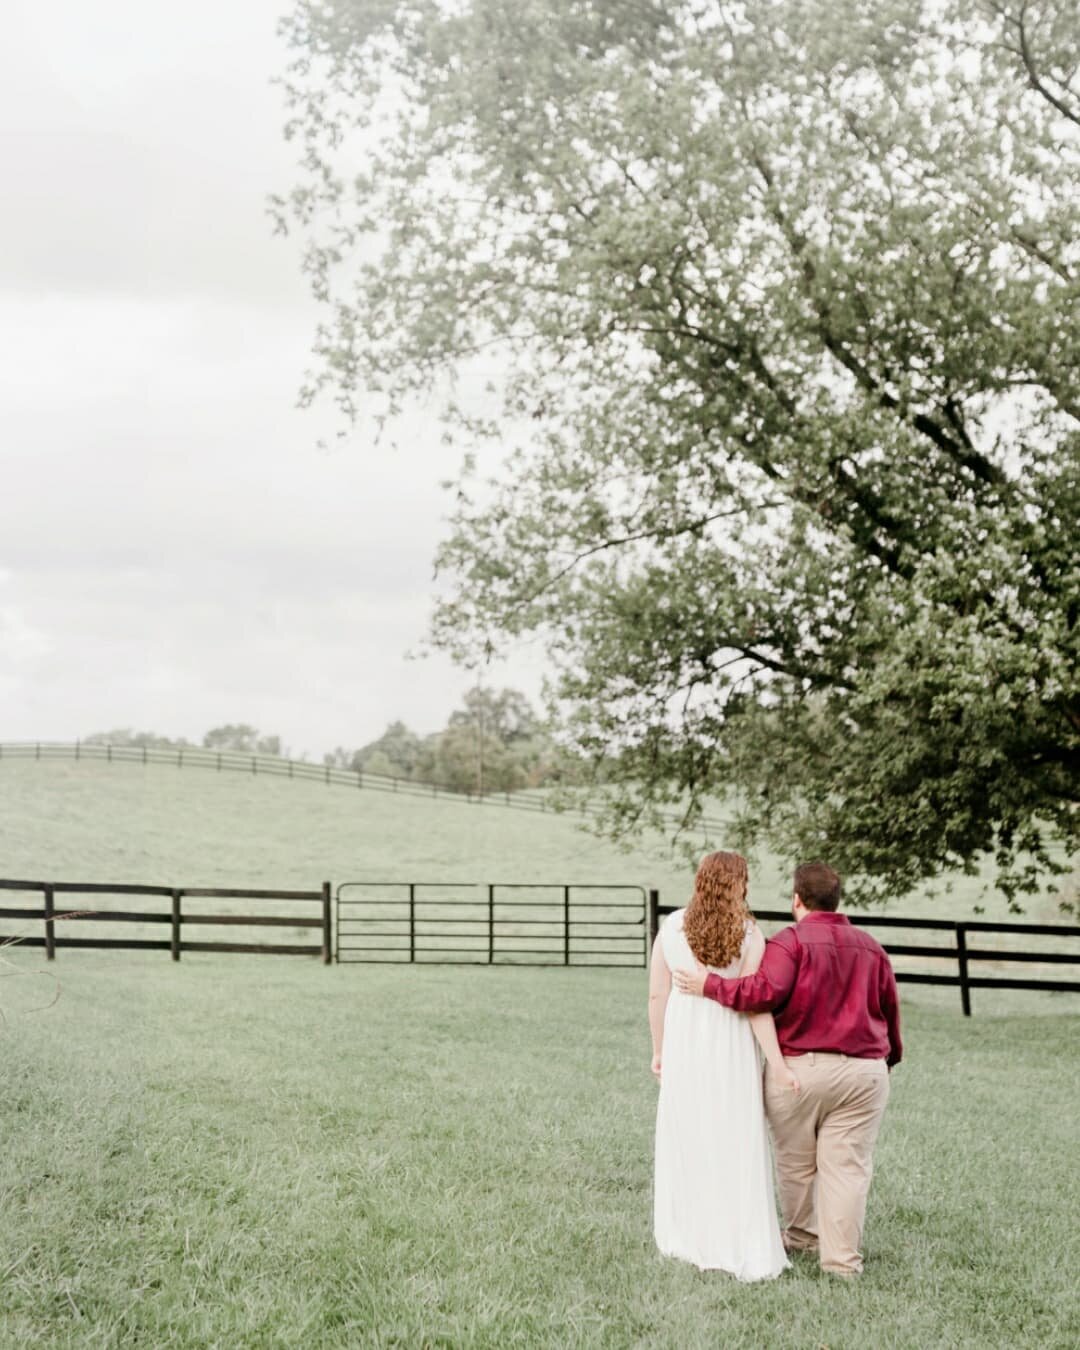 Tip: revisit your wedding venue for your anniversary shoot! This couple loved the venue so much they wanted to come back and relive all the memories, roosters and all! It was so much fun hearing their behind stories throughout the whole shoot ✨